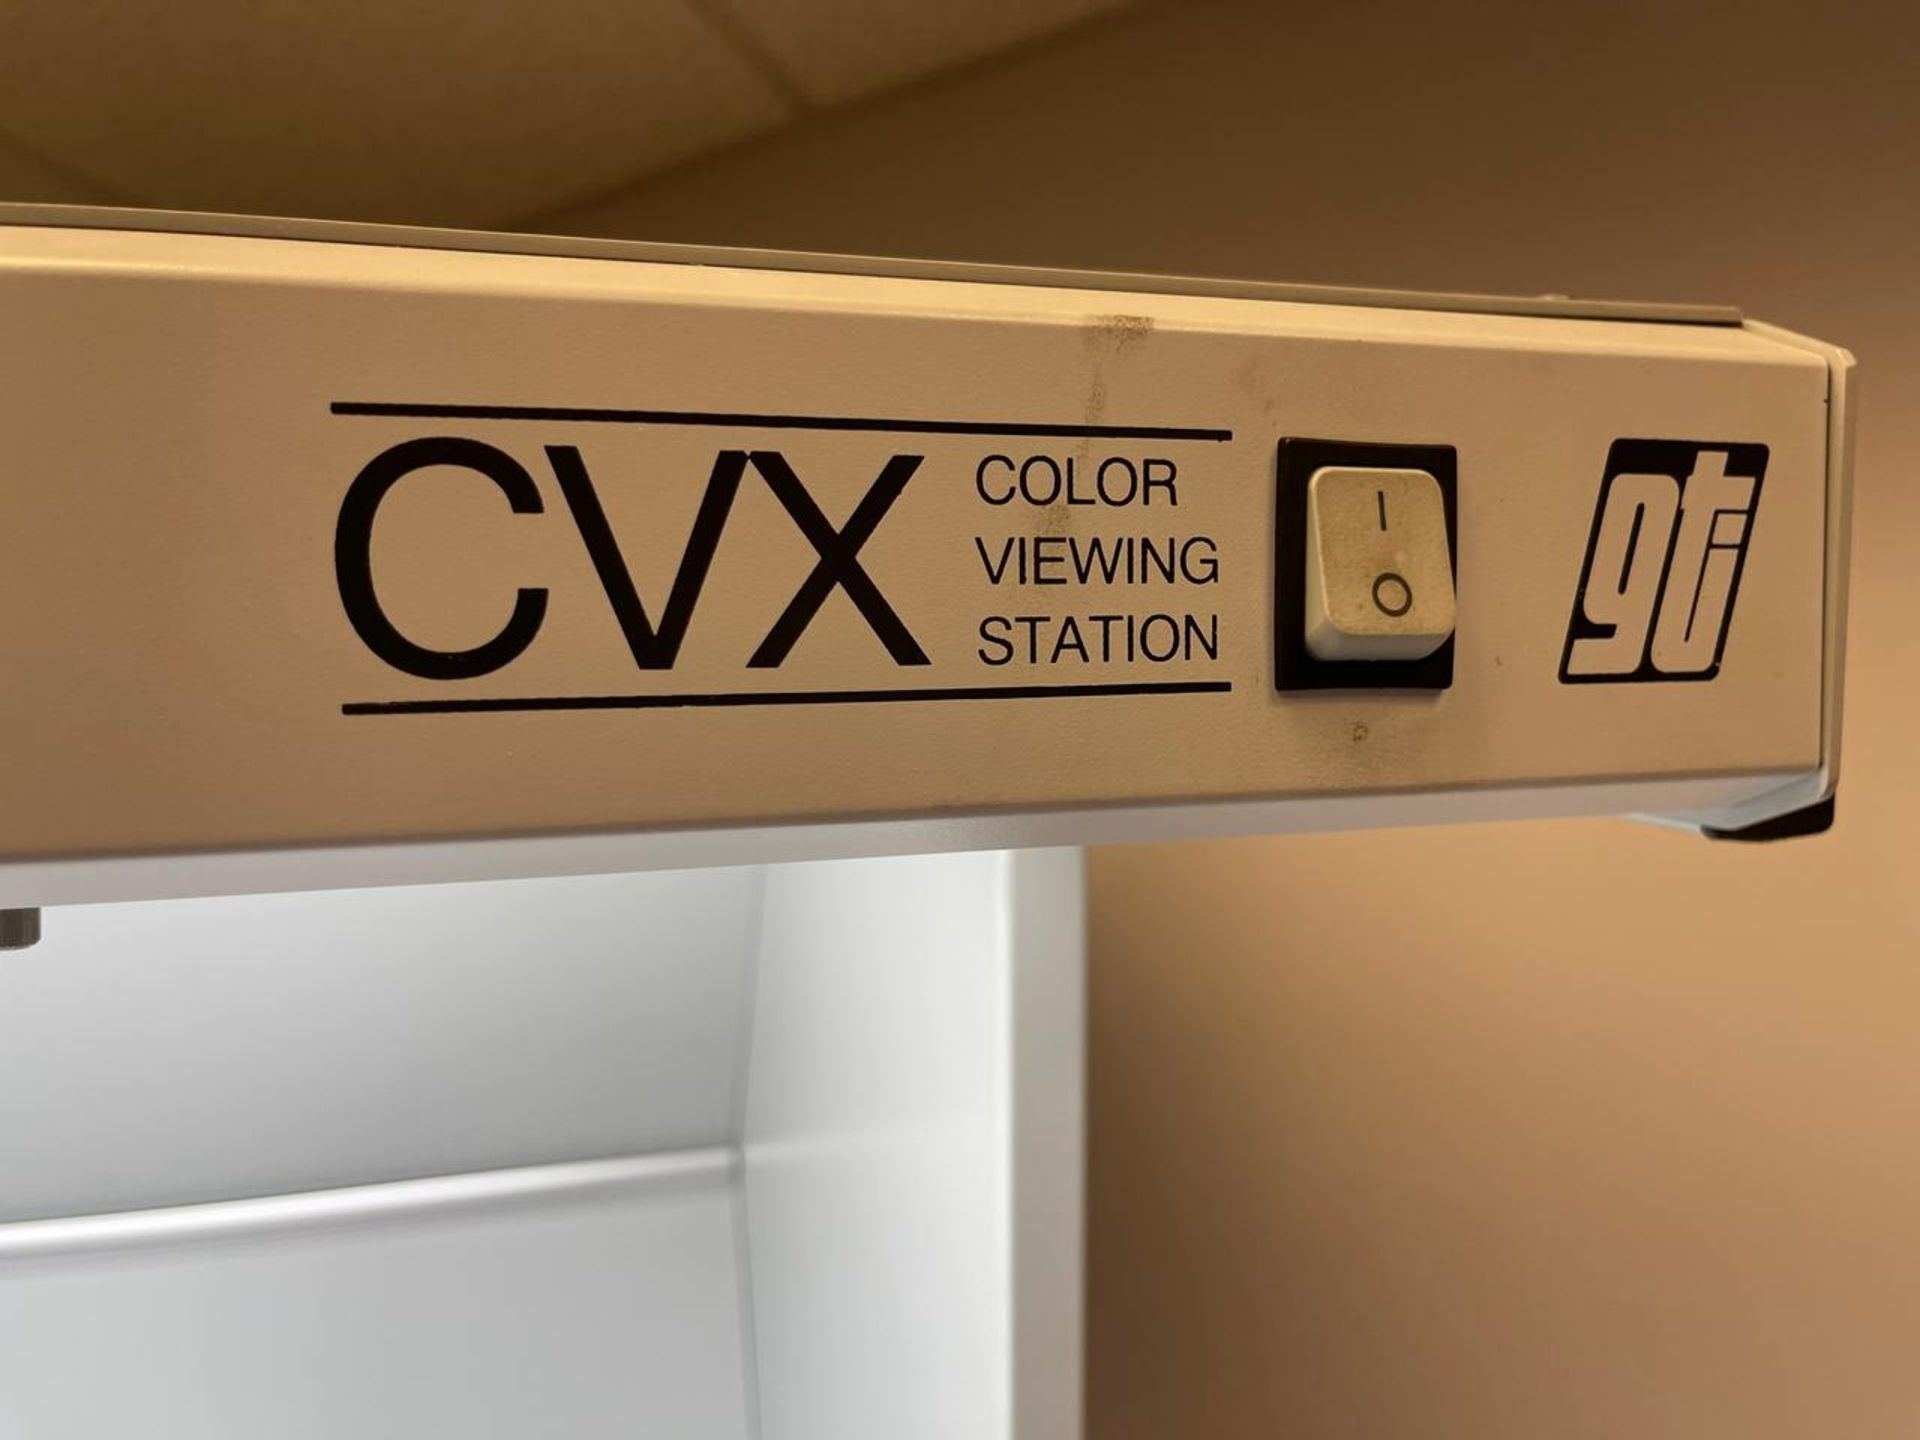 GTI GRAPHICLITE CVX COLOR VIEWING STATION - Image 2 of 3